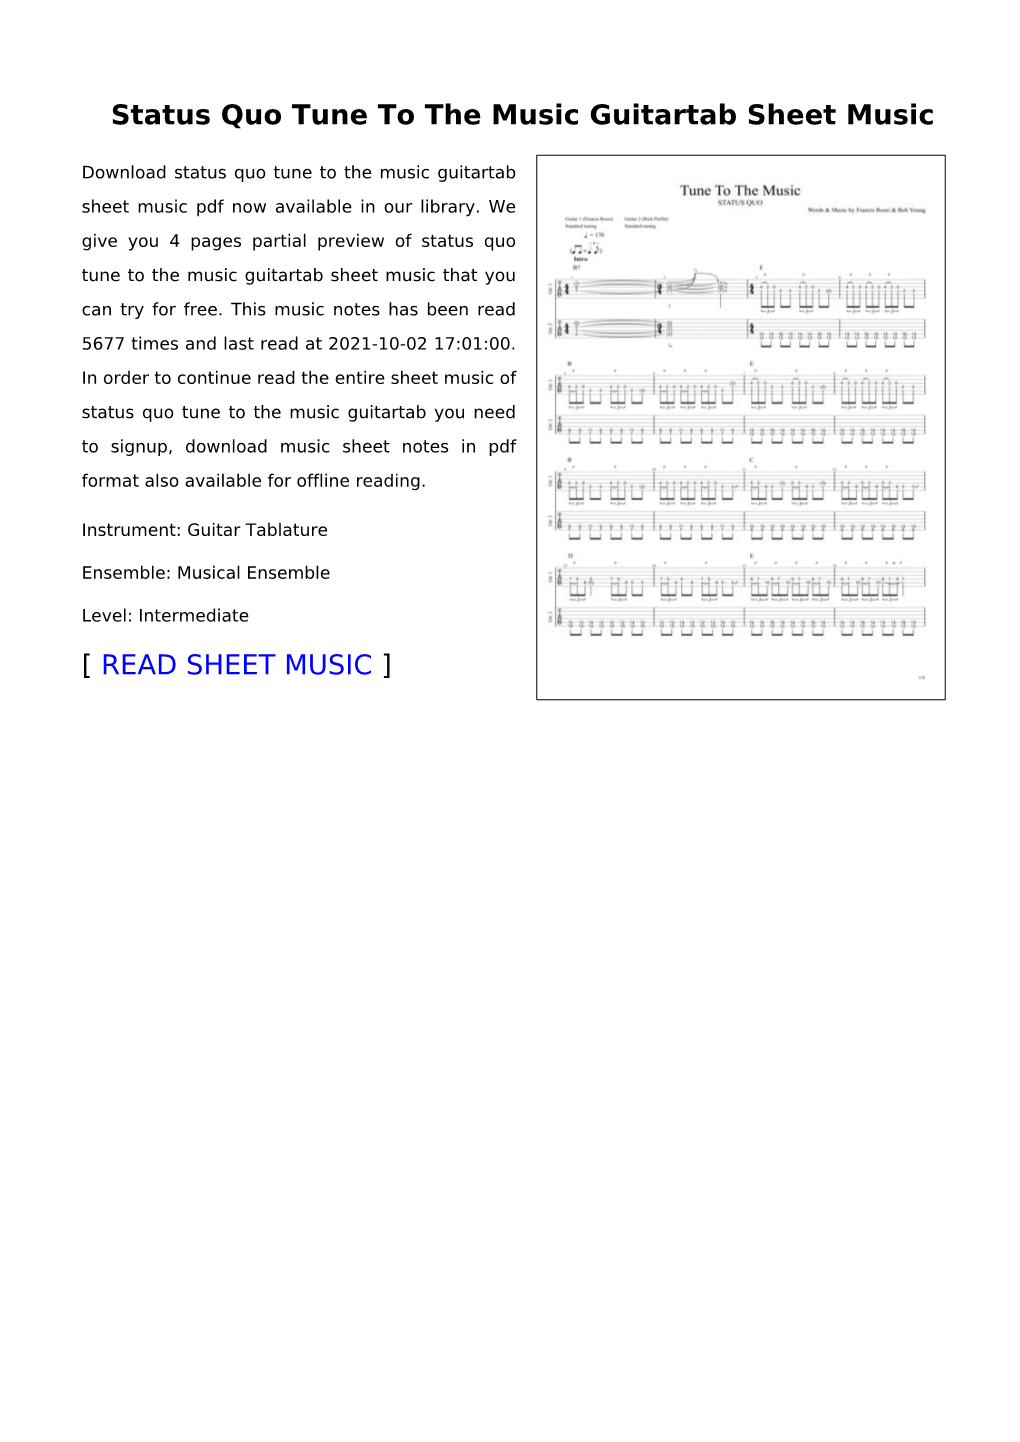 Sheet Music of Status Quo Tune to the Music Guitartab You Need to Signup, Download Music Sheet Notes in Pdf Format Also Available for Offline Reading